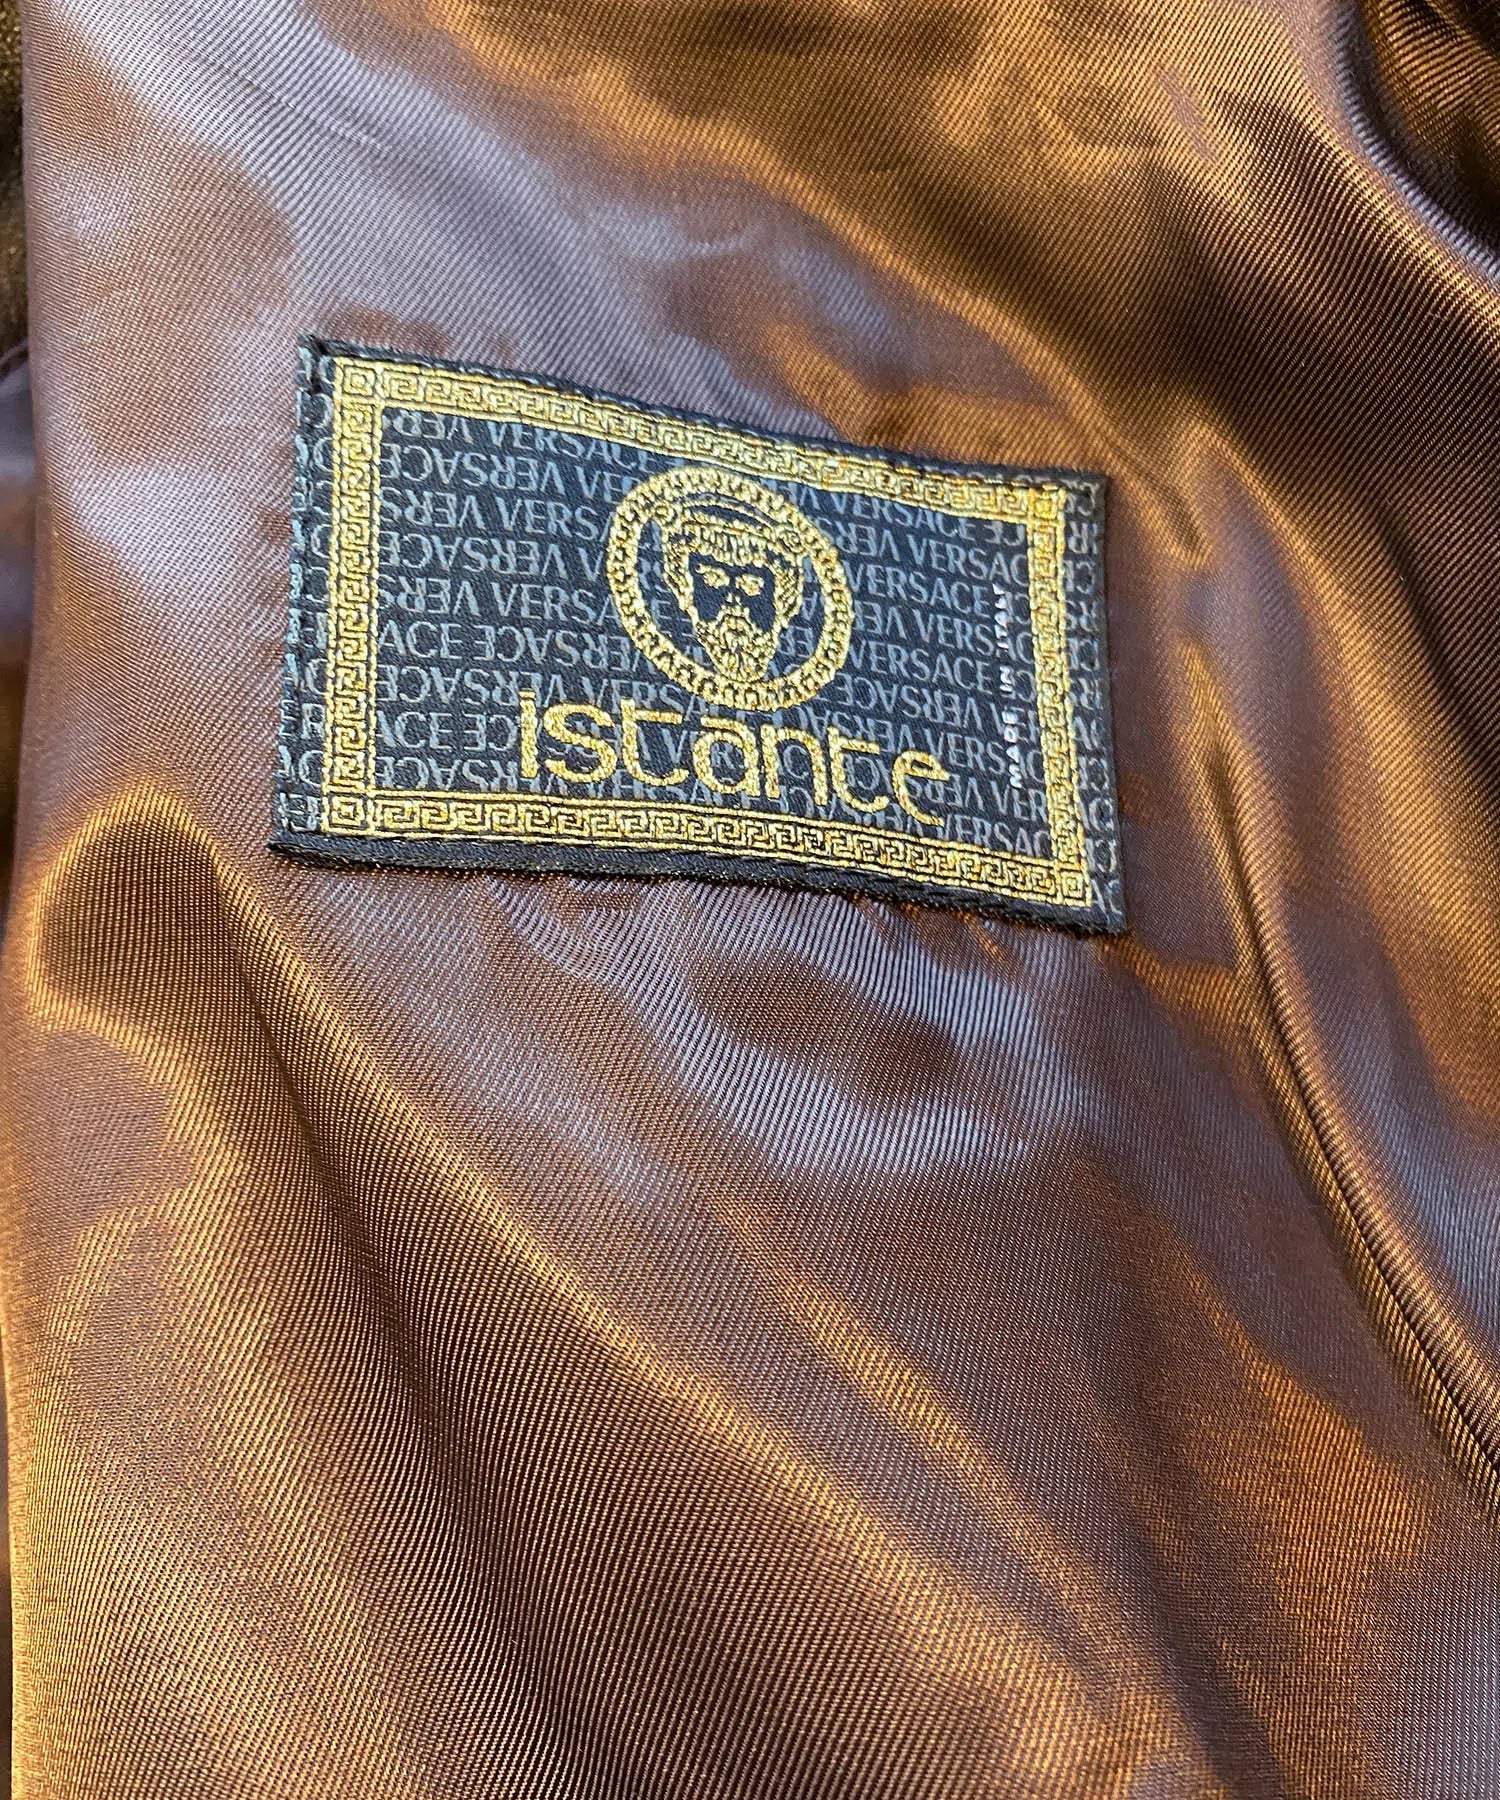 Istante by Versace Leather Jacket